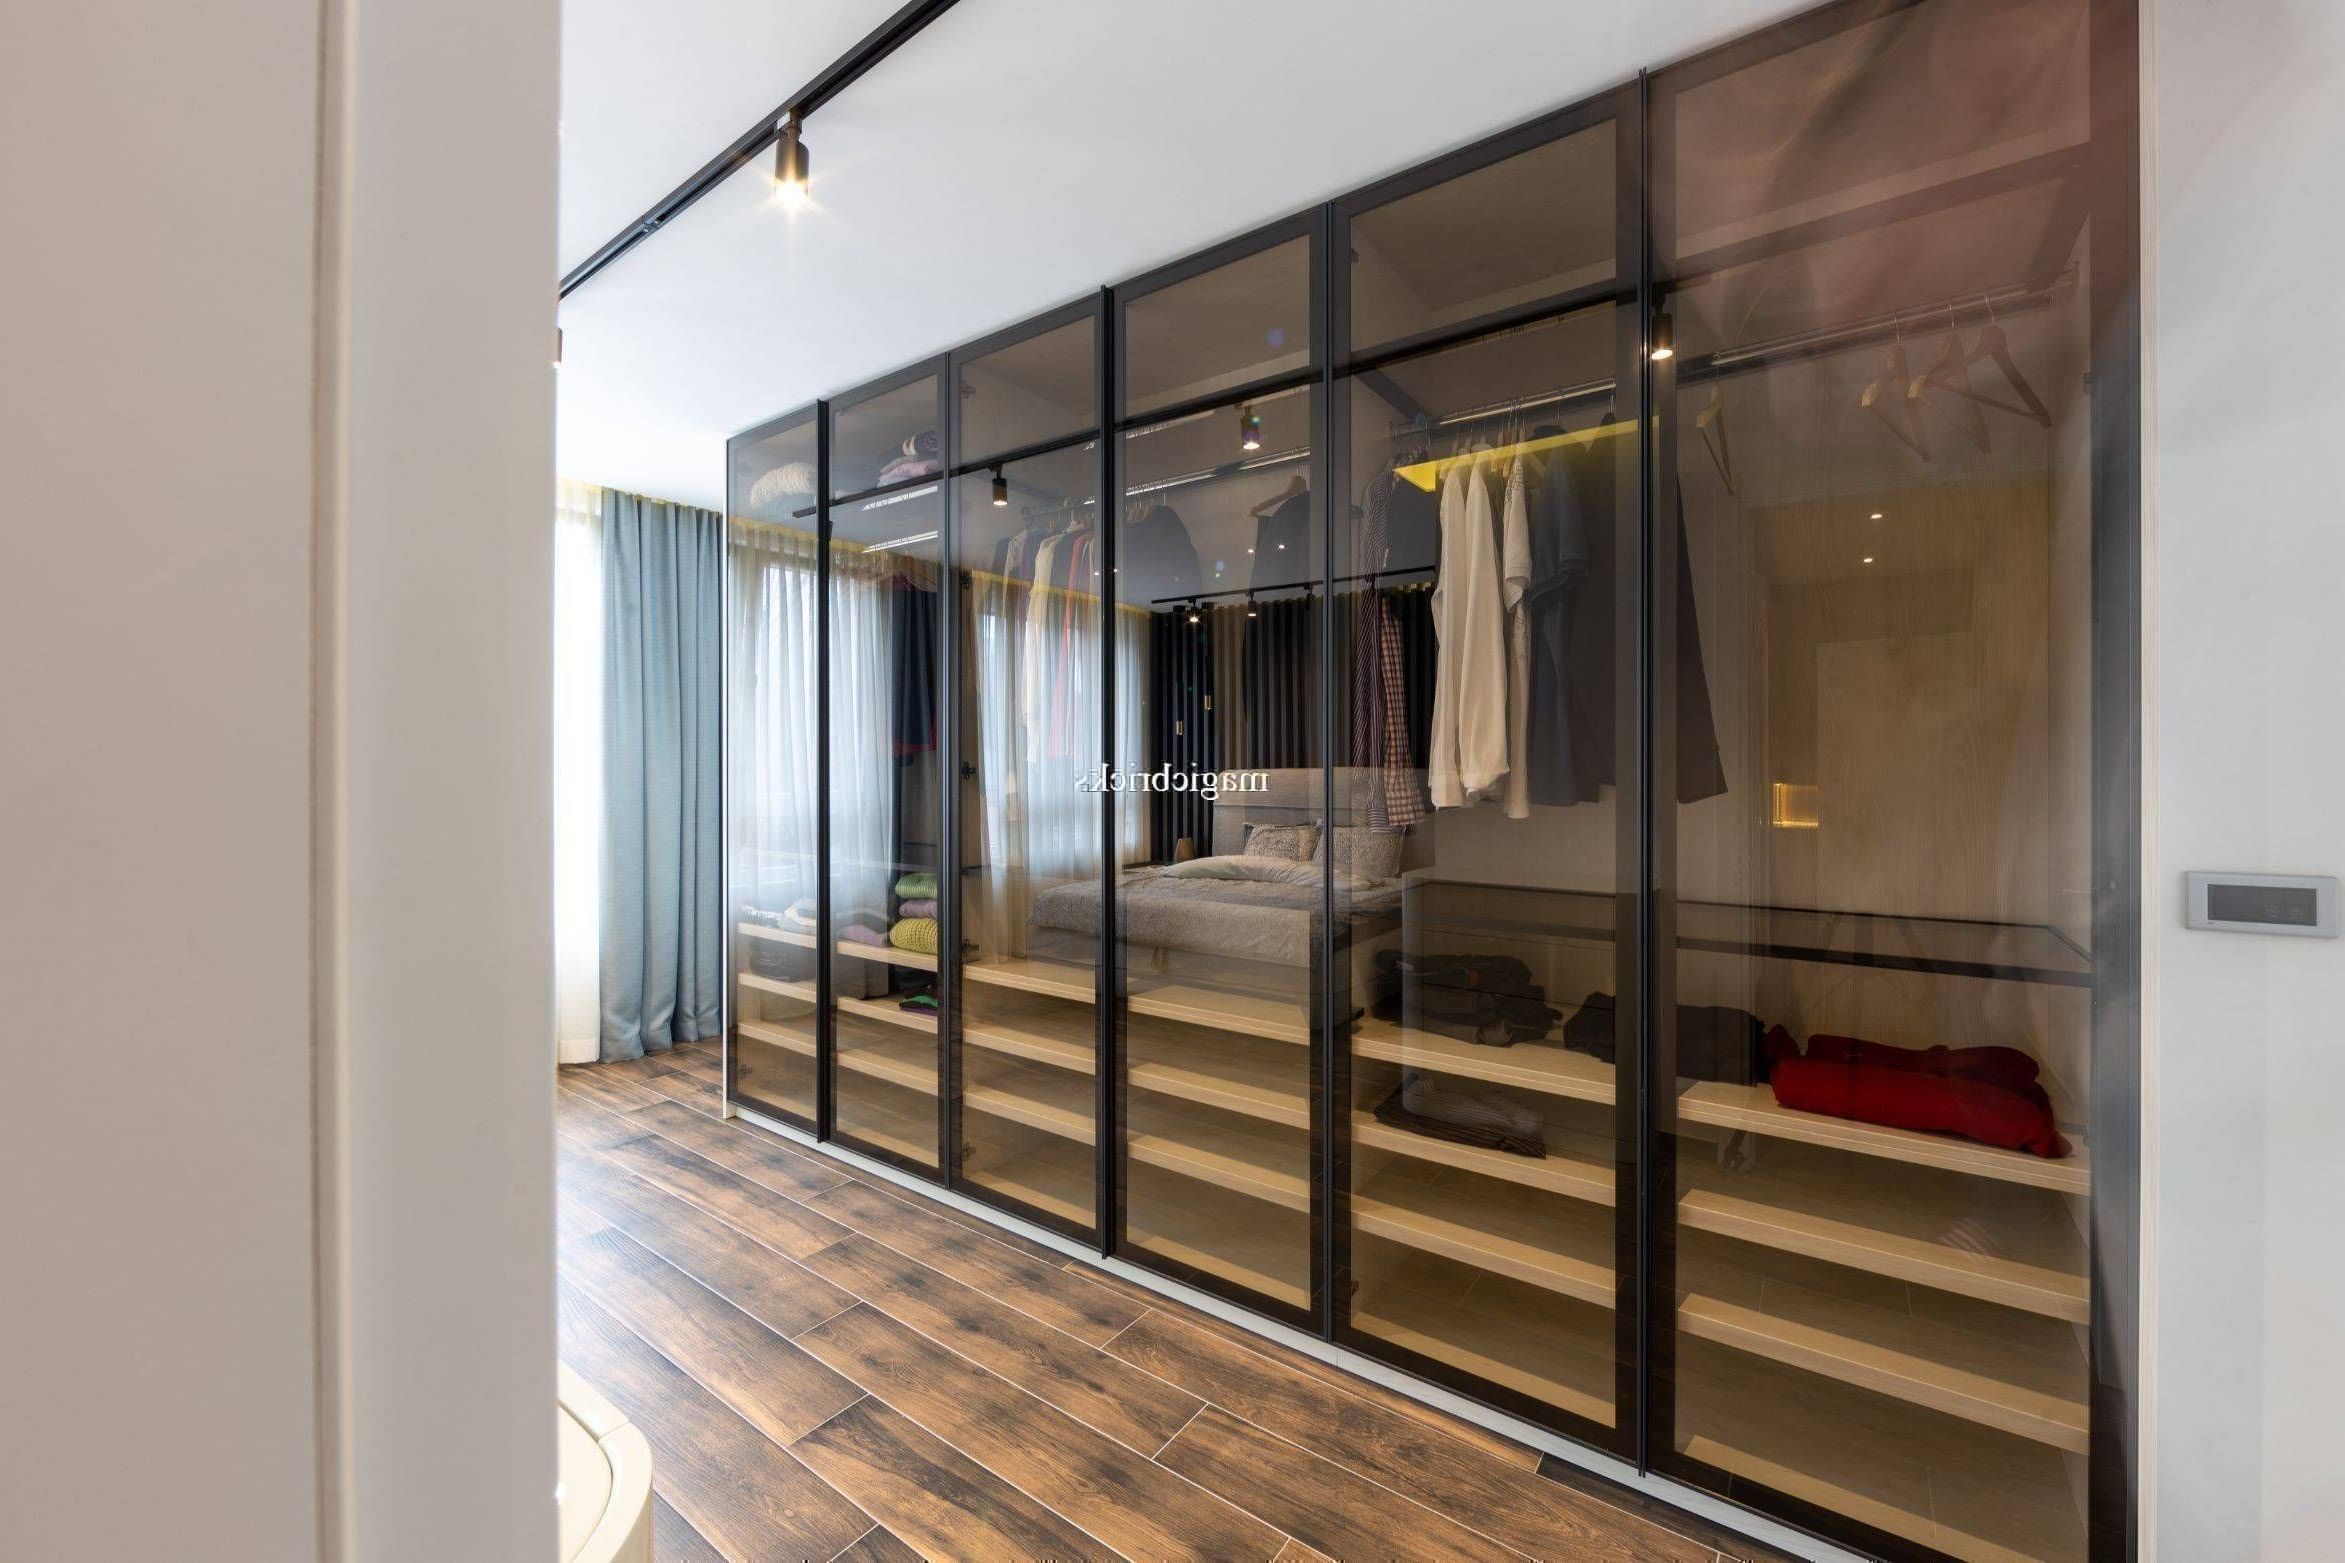 15 Glass Wardrobe Design Ideas For Your Home Pertaining To Black Glass Wardrobes (View 16 of 20)